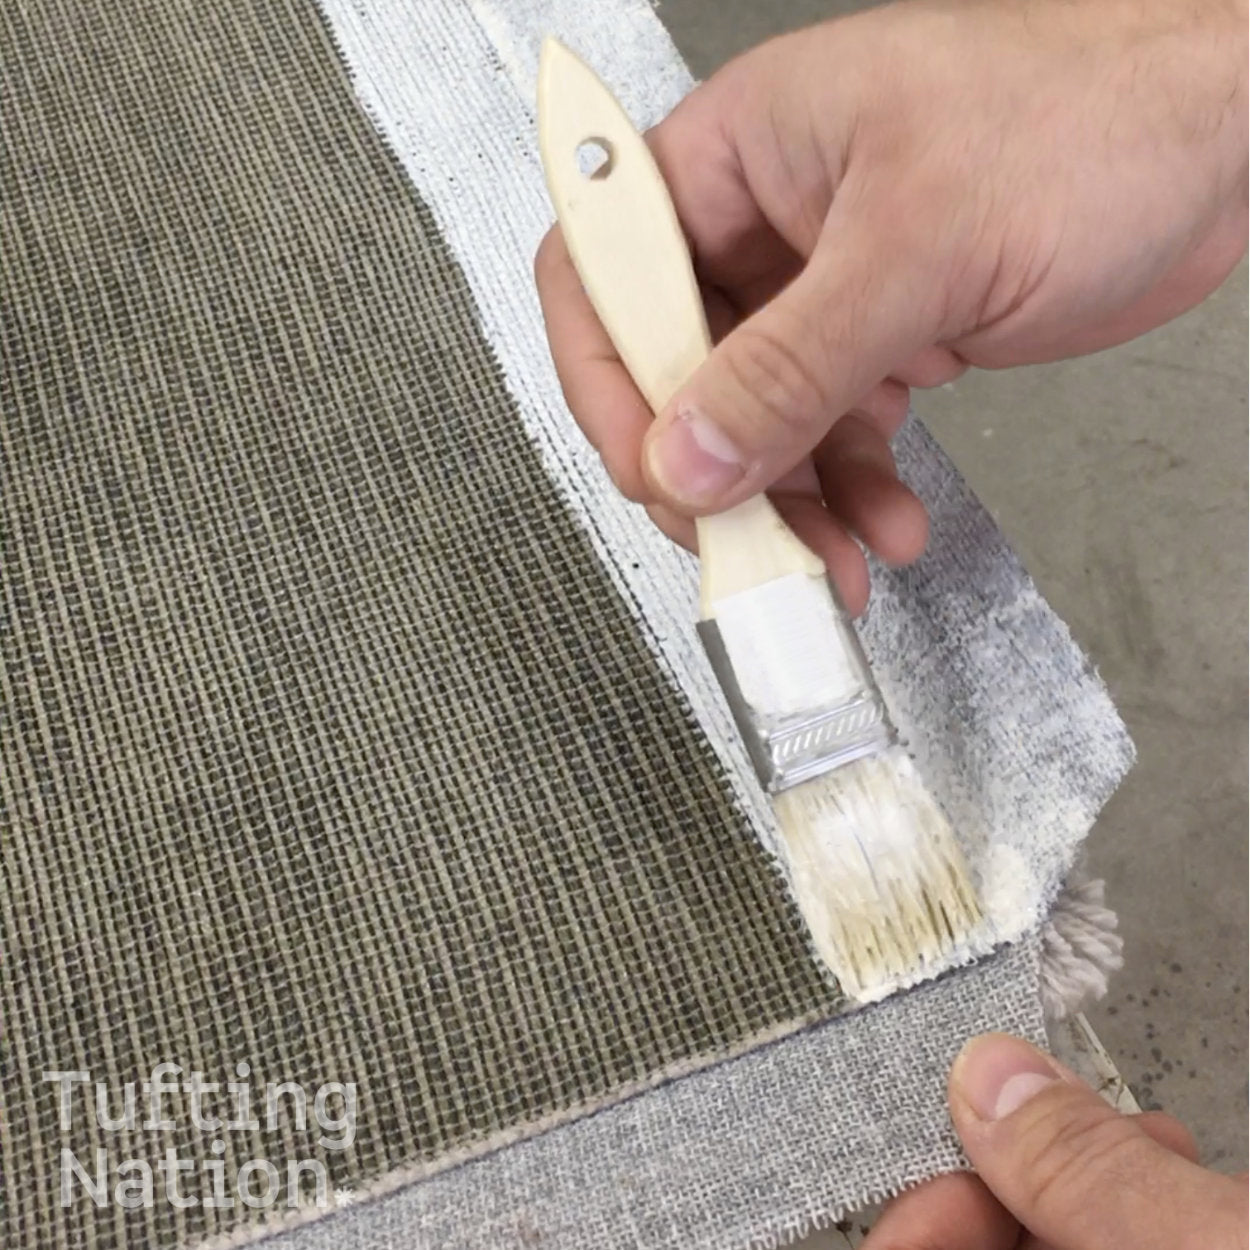 Adhesive glue for fabric borders on back of tufted rugs